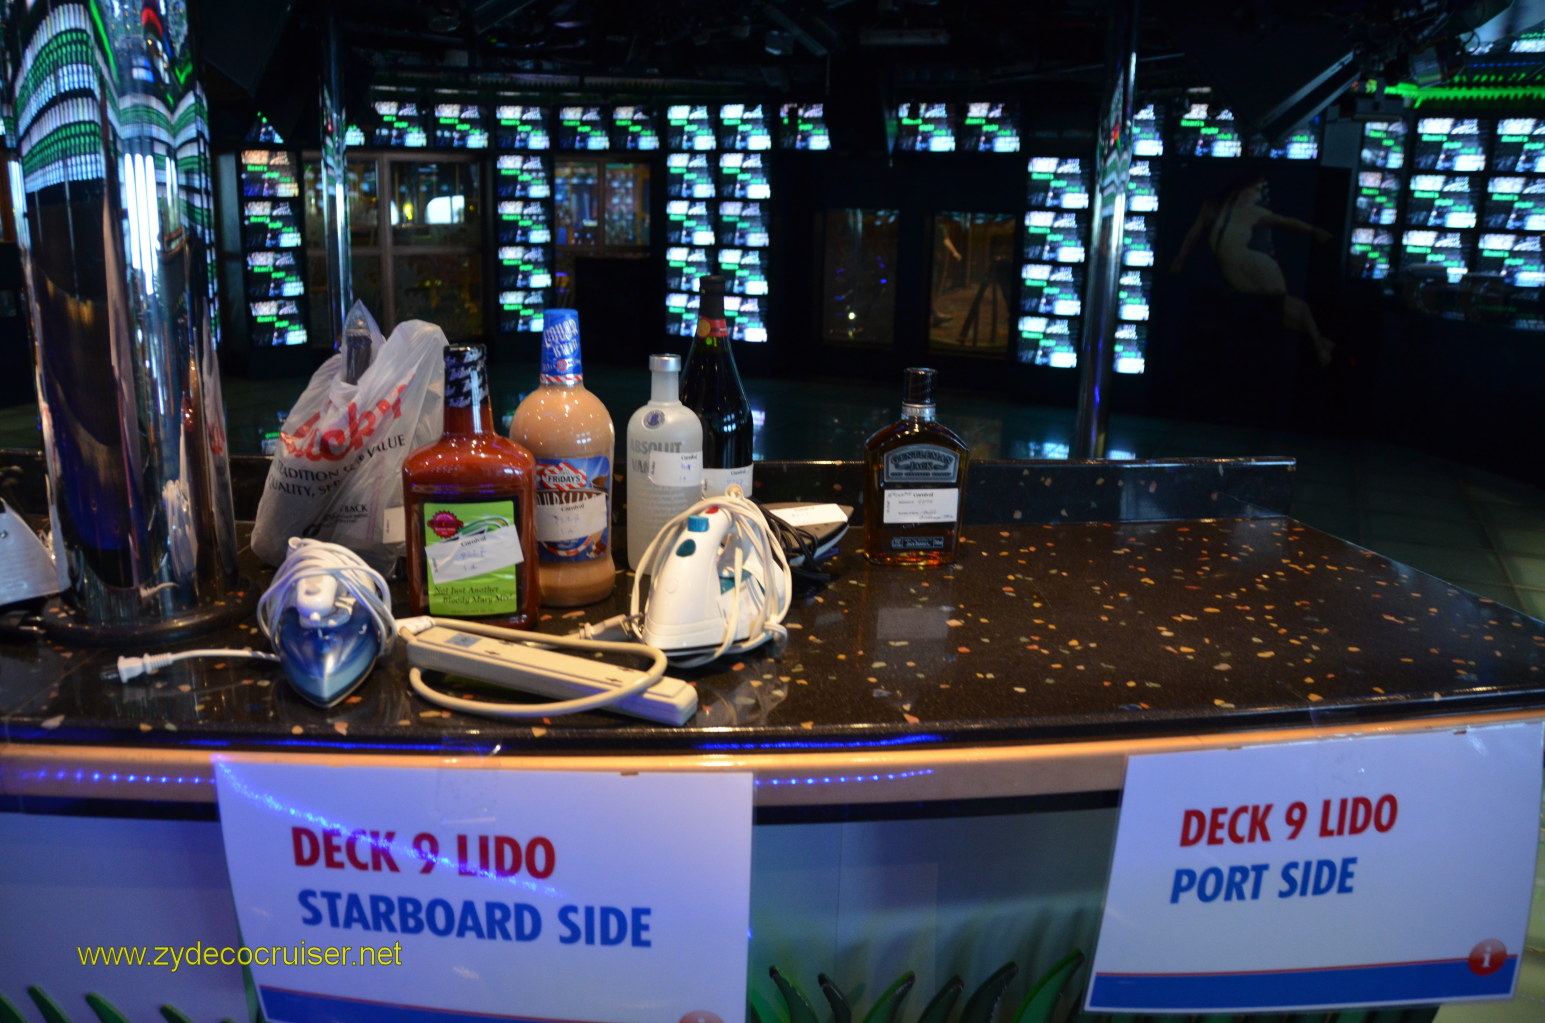 003: Carnival Conquest, Nov 20, 2011, Debarkation Day, Confiscated Item Pickup, 